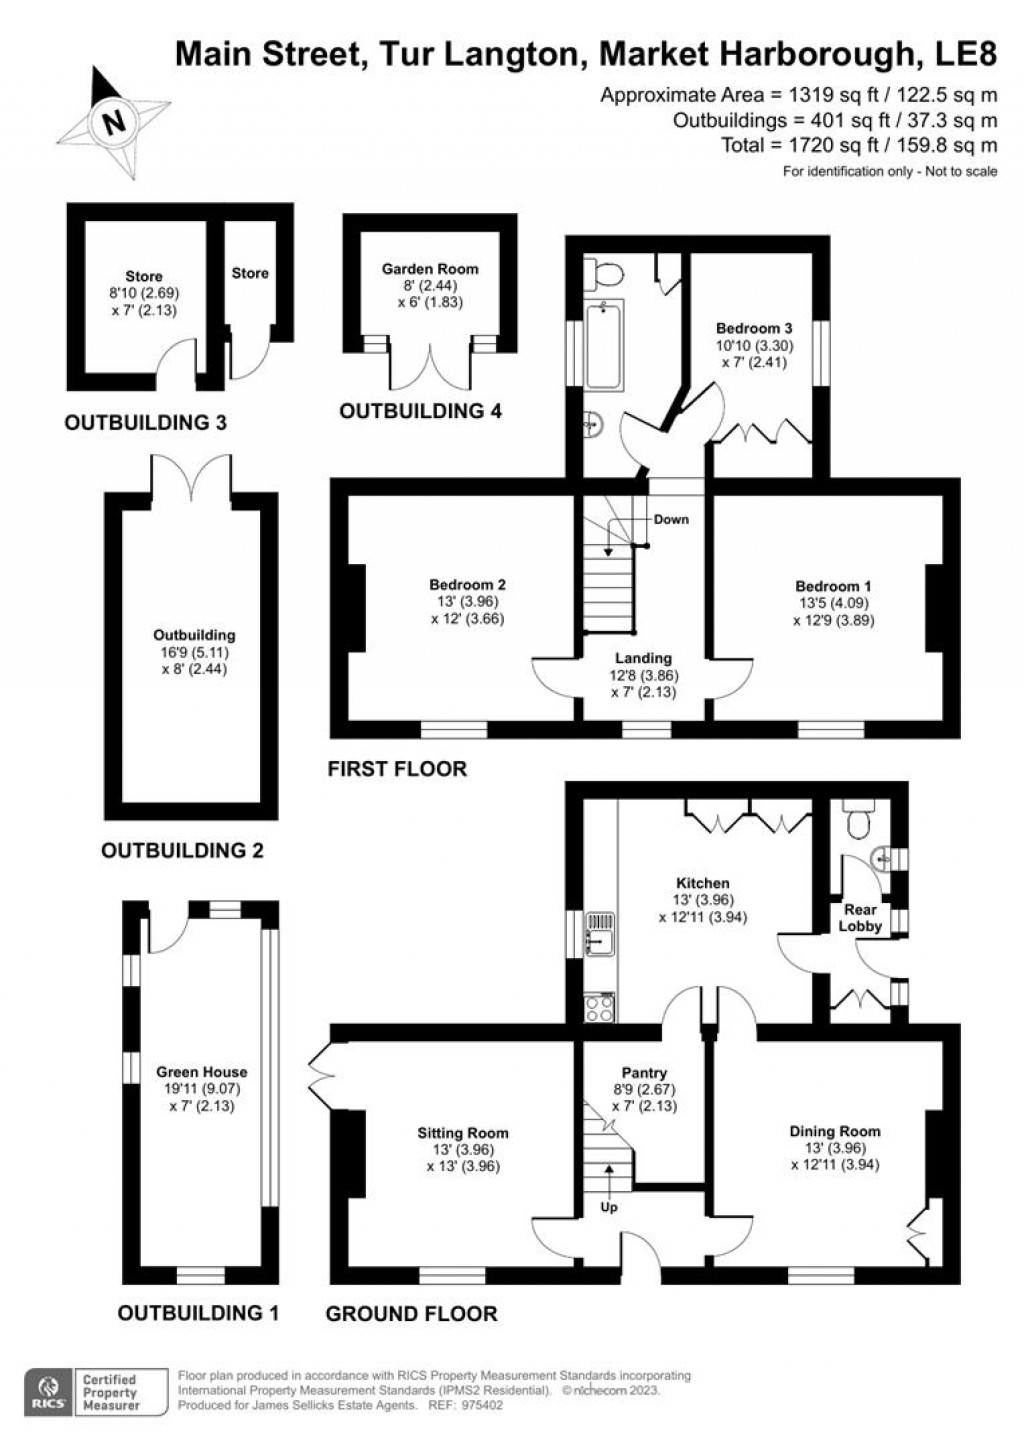 Floorplans For Yew Tree House, Tur Langton, Leicestershire